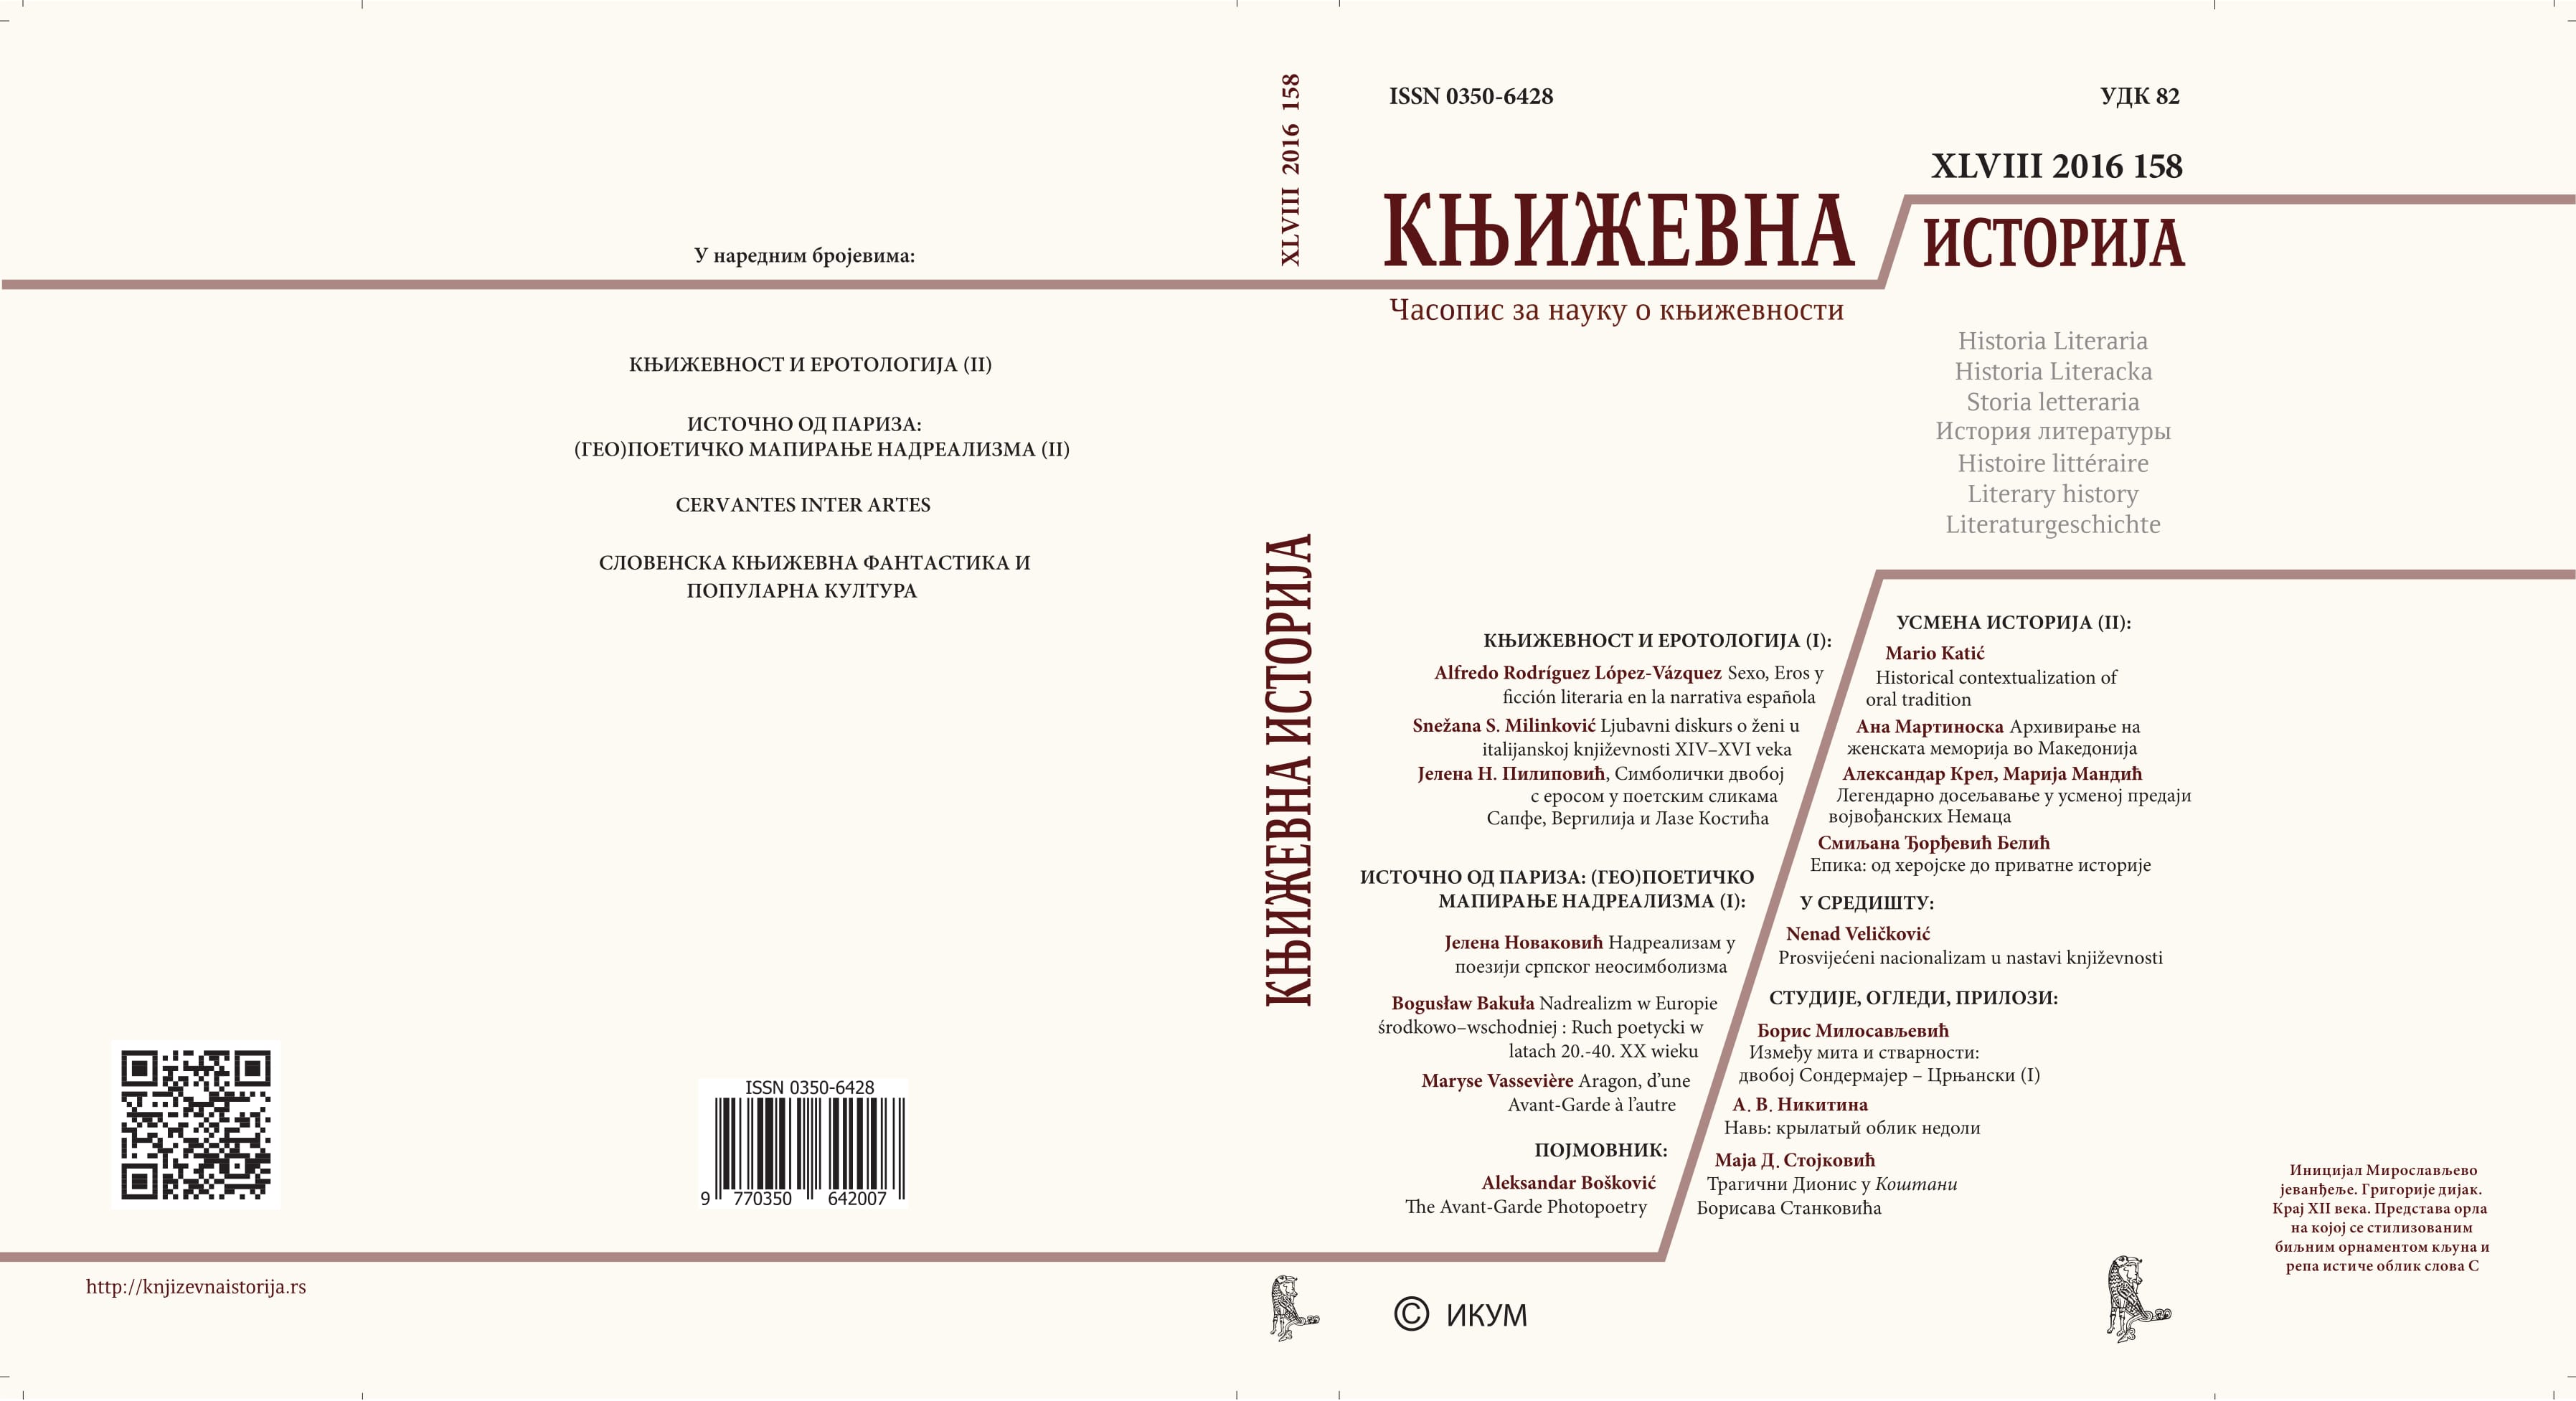 Milica Jankovic and female literary tradition Cover Image